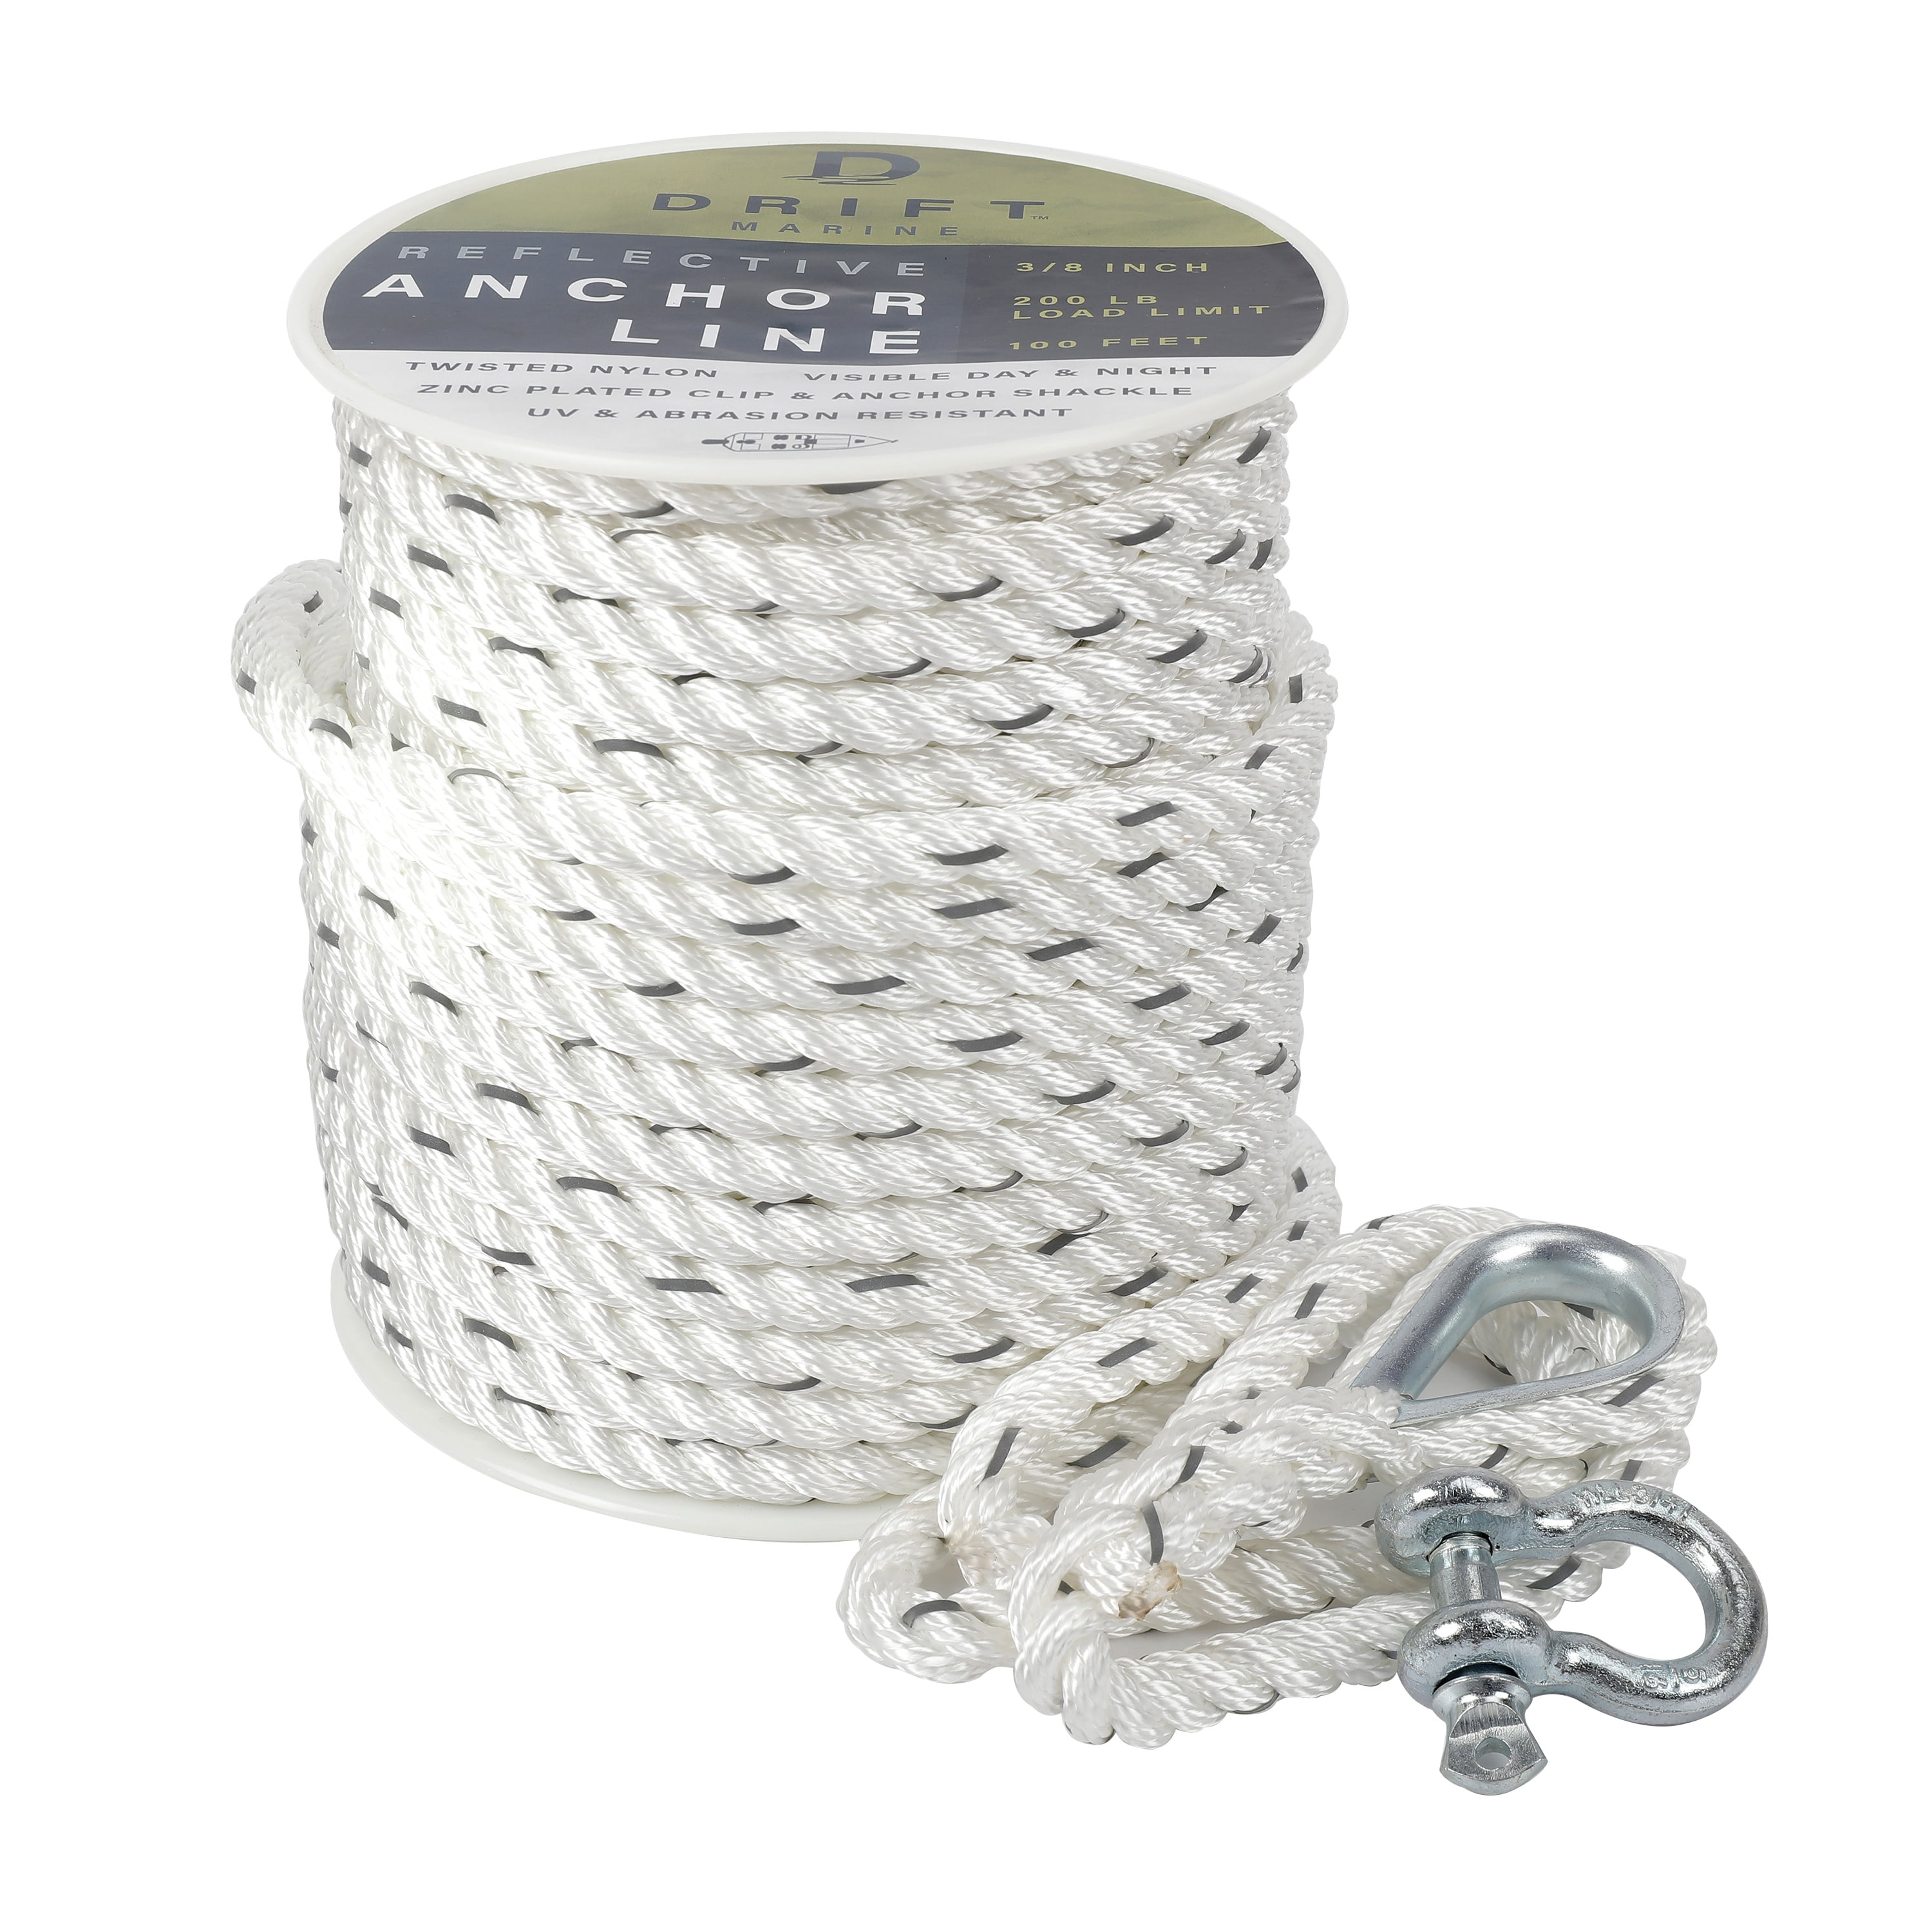 Drift 3/8 x 100 Twisted Nylon Reflective Anchor Line with Shackle, White and Silver, Size: 100